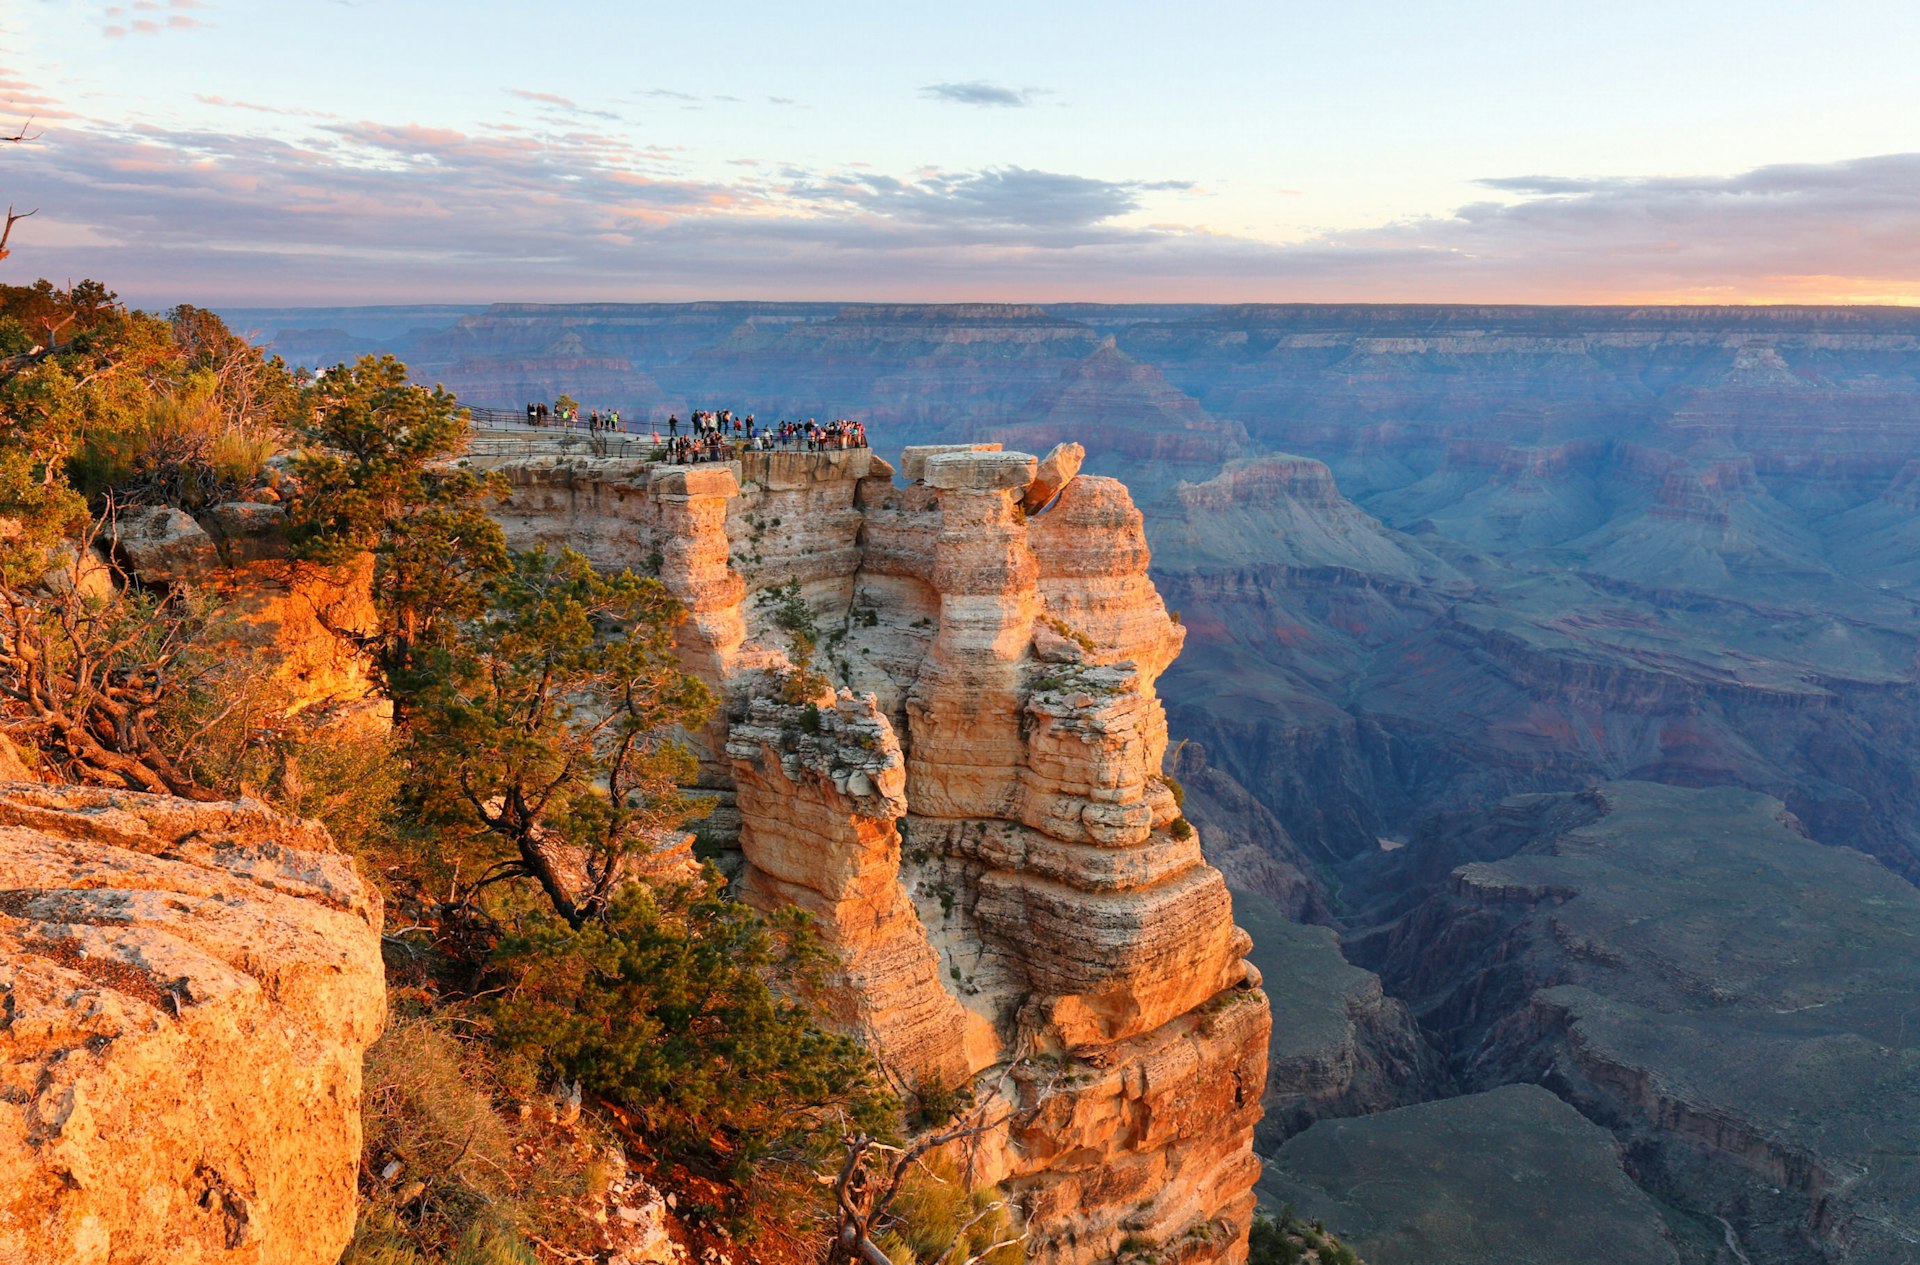 Sunrise at Mather Point. Photo Shows a Group of Tourists Watching Sunrise at Mather Point which is famous for Sunrise. american, arizona, canyon, coast, grand, landscape, light